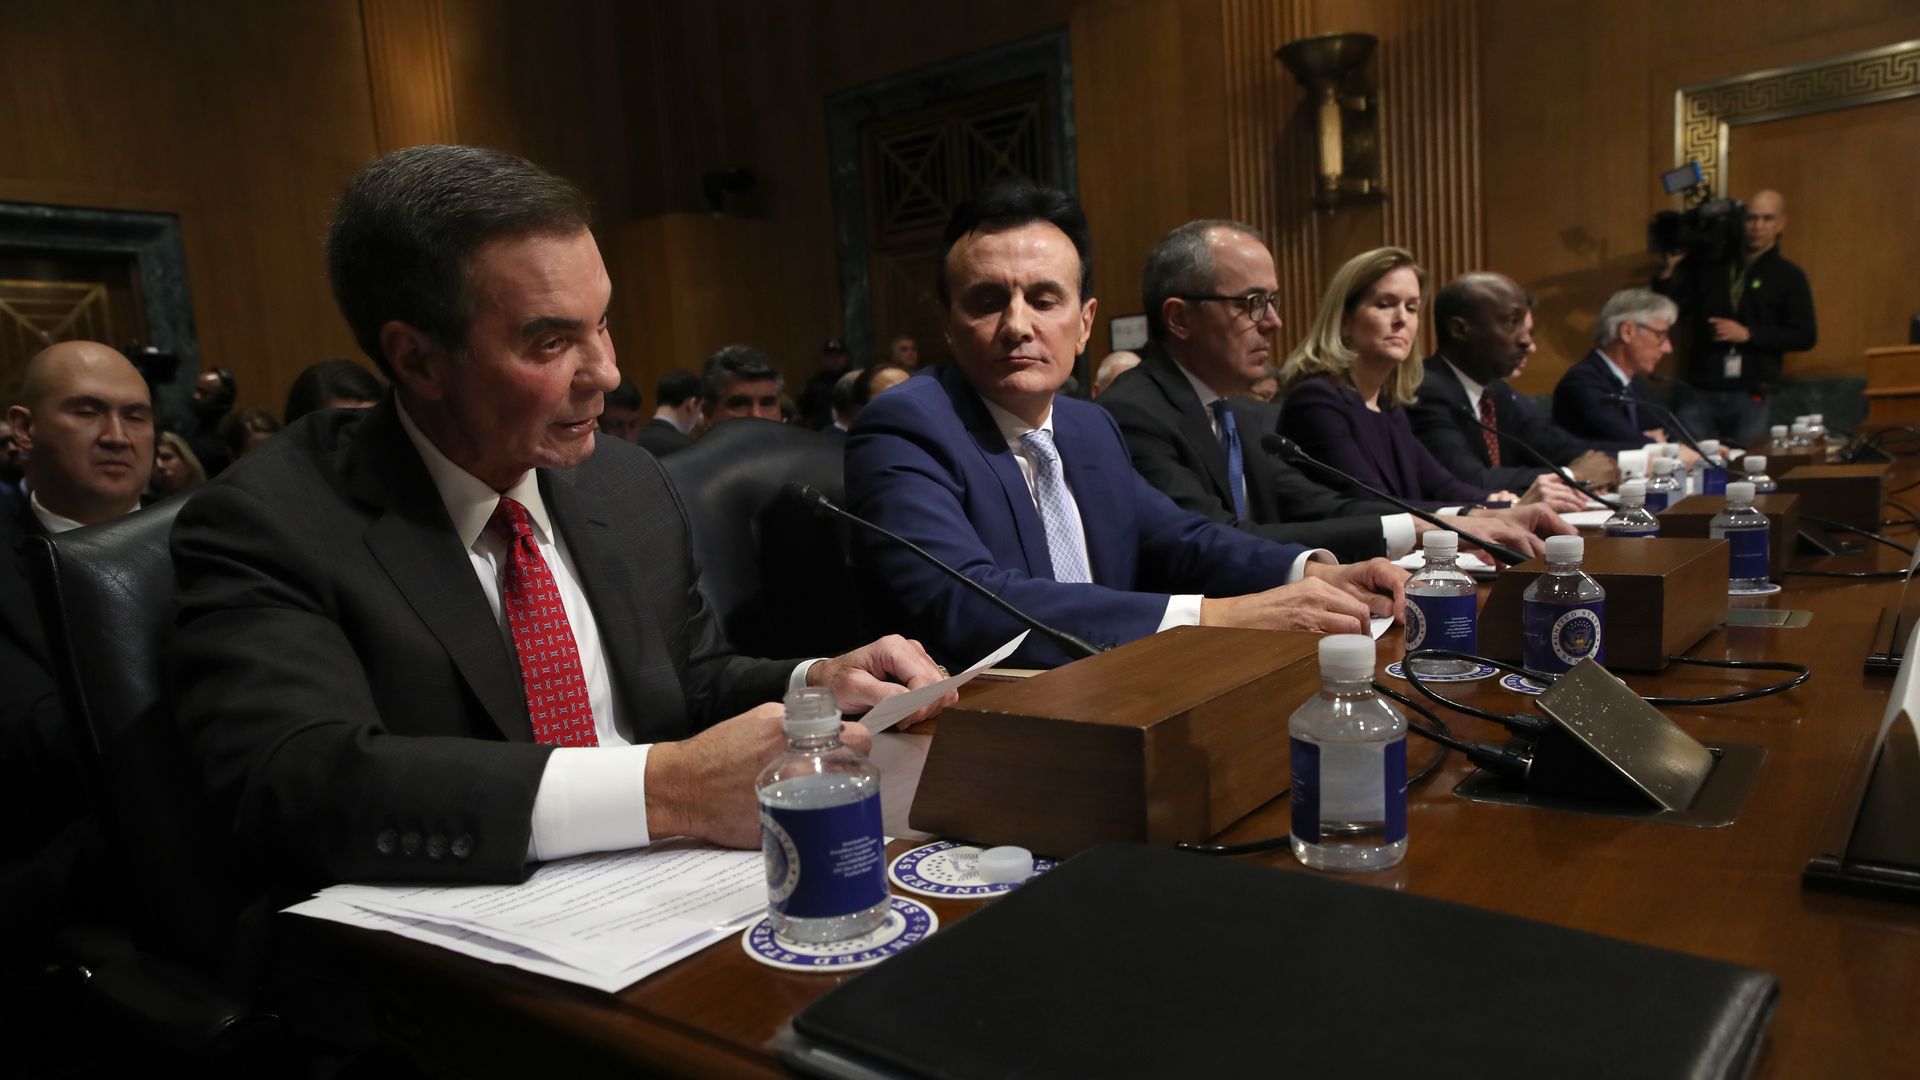 7 top pharmaceutical CEOs testify in front of the Senate Finance Committee